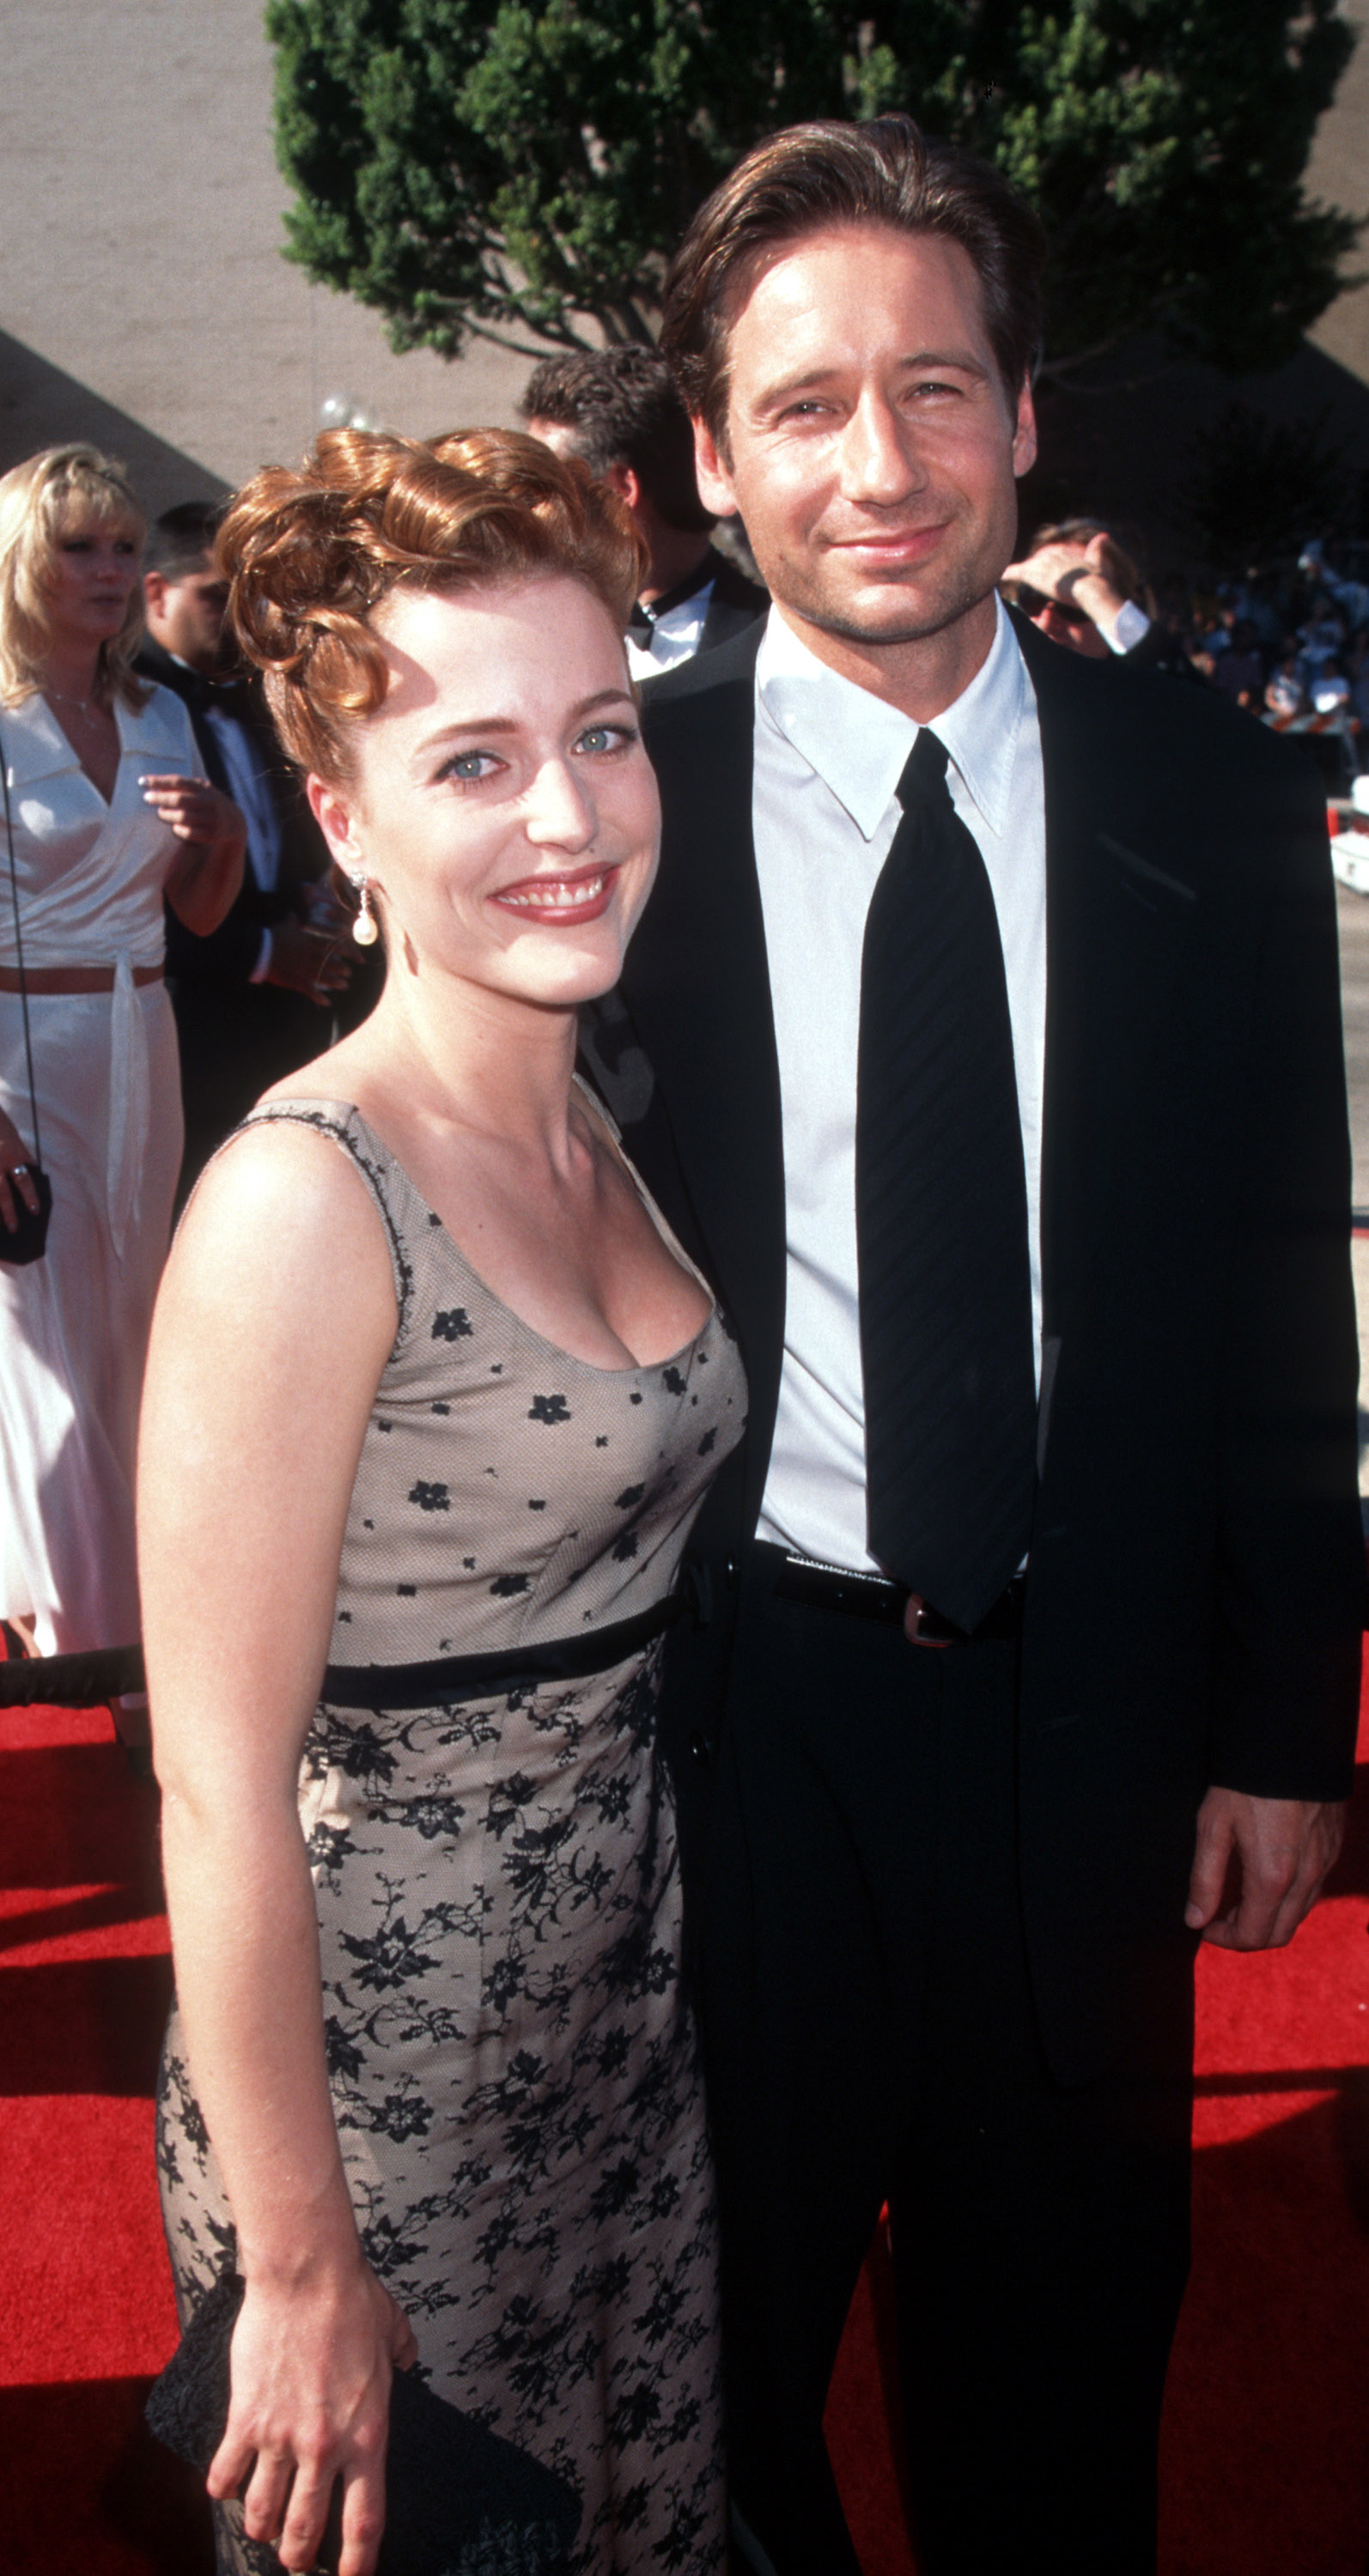 Gillian Anderson and David Duchovny attend the 48th Annual Emmy Awards in Pasadena, Calif. on Sept. 8, 1996.